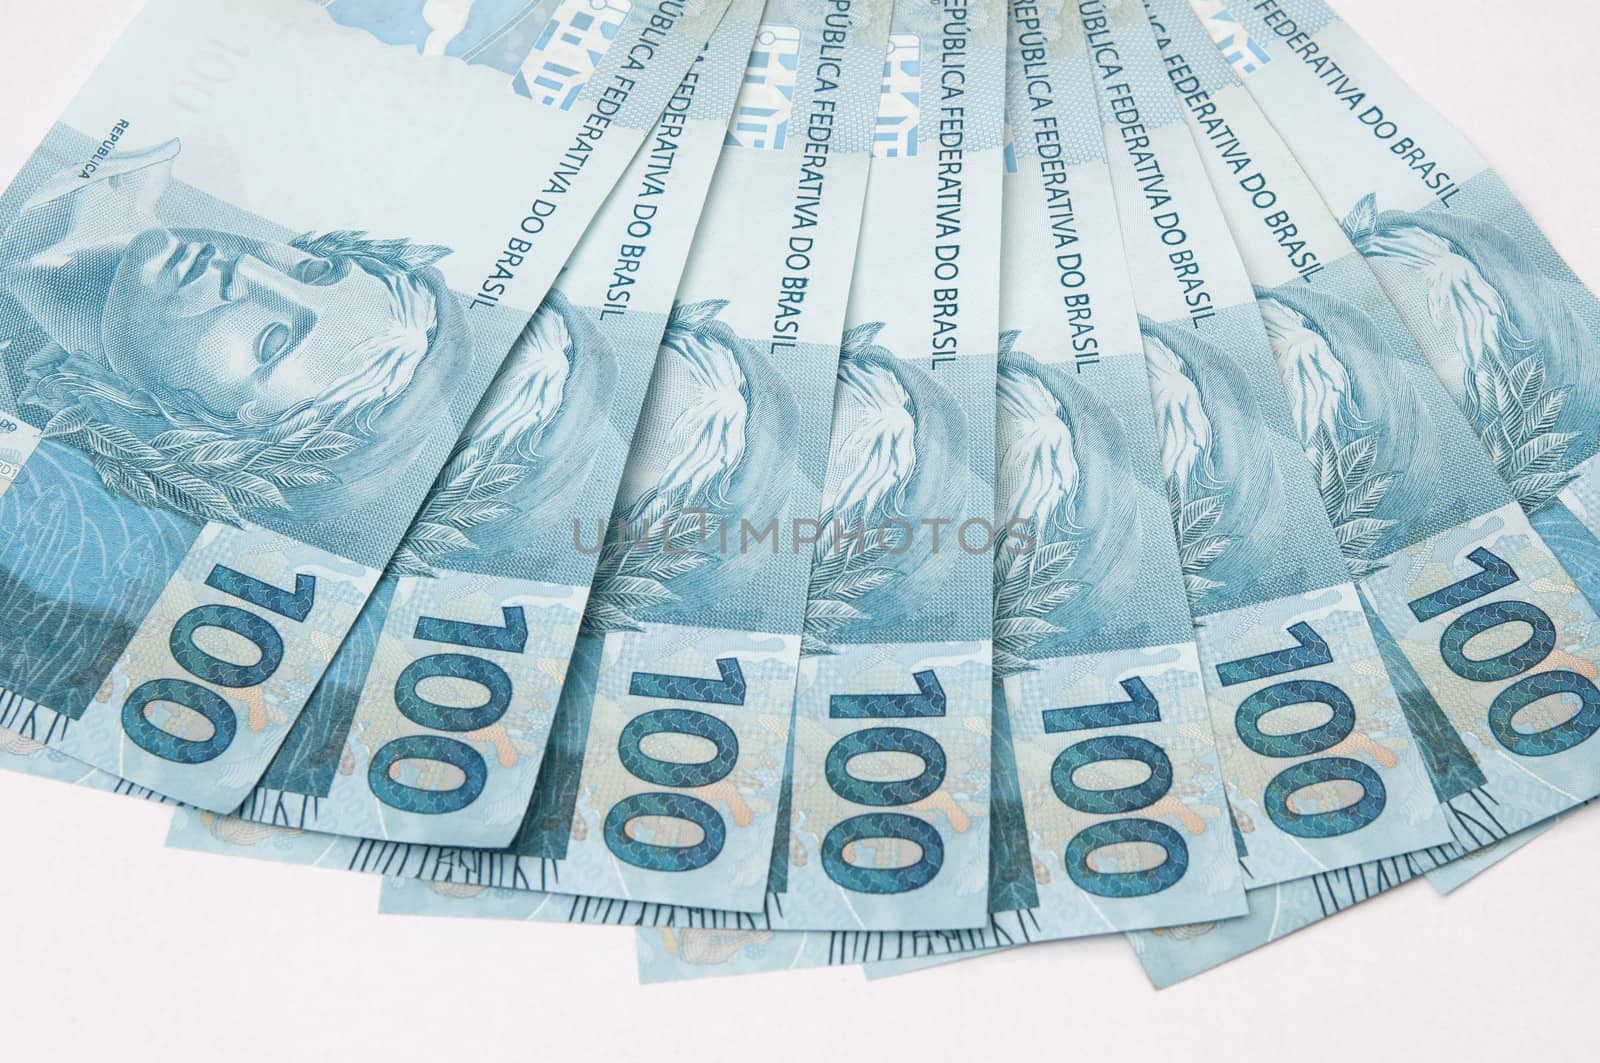 The brazilian currency on white background (Real)